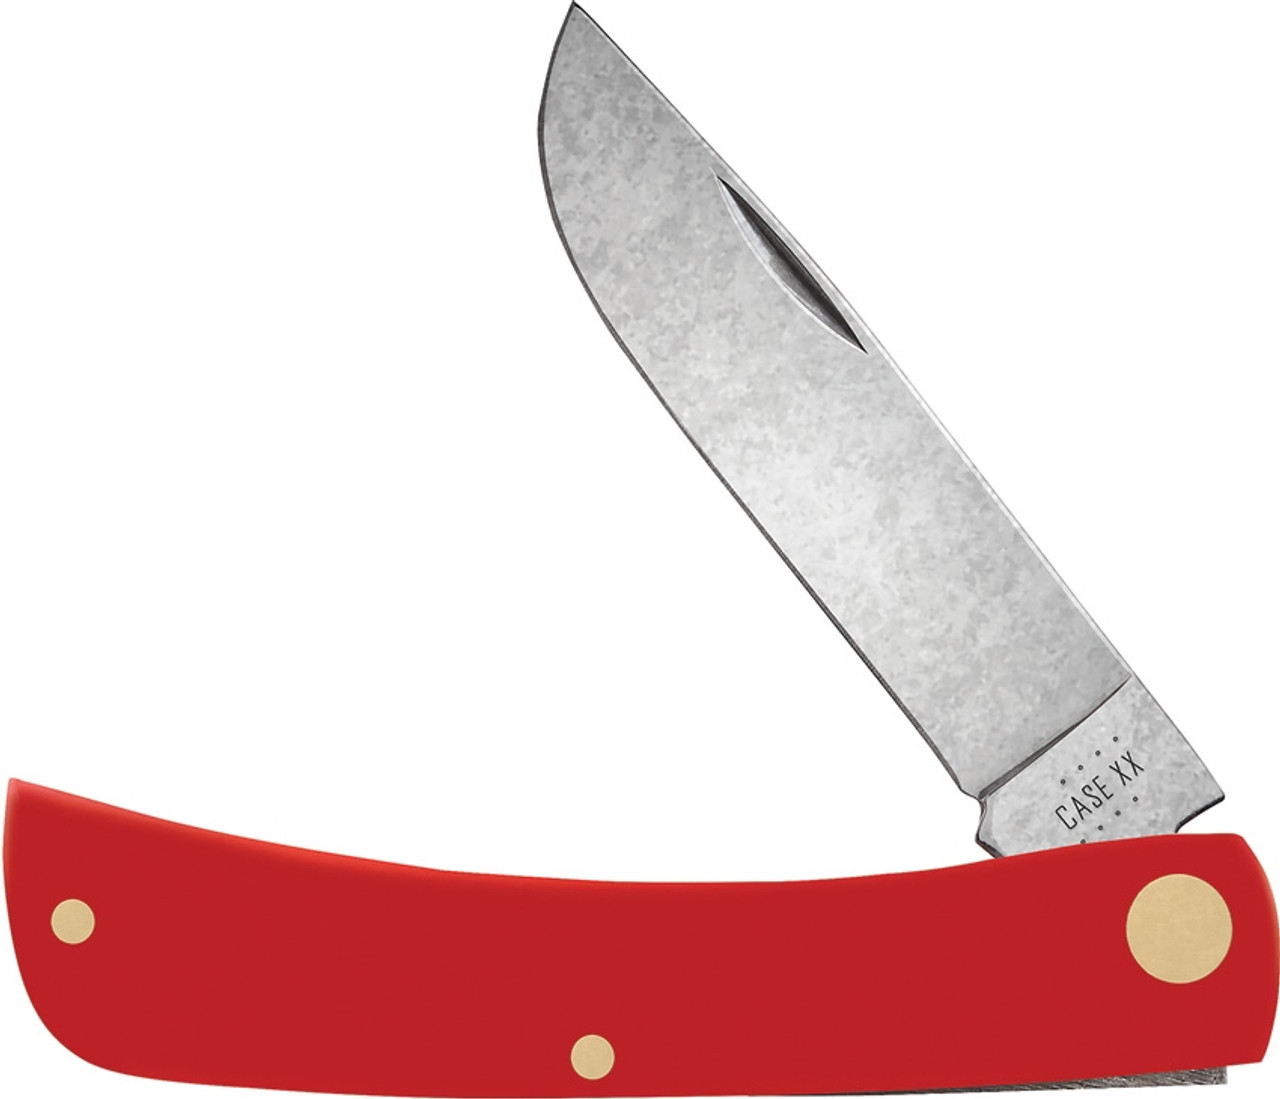 Case Cutlery Sod Buster Jr Folding Knife Red Synthetic Handle